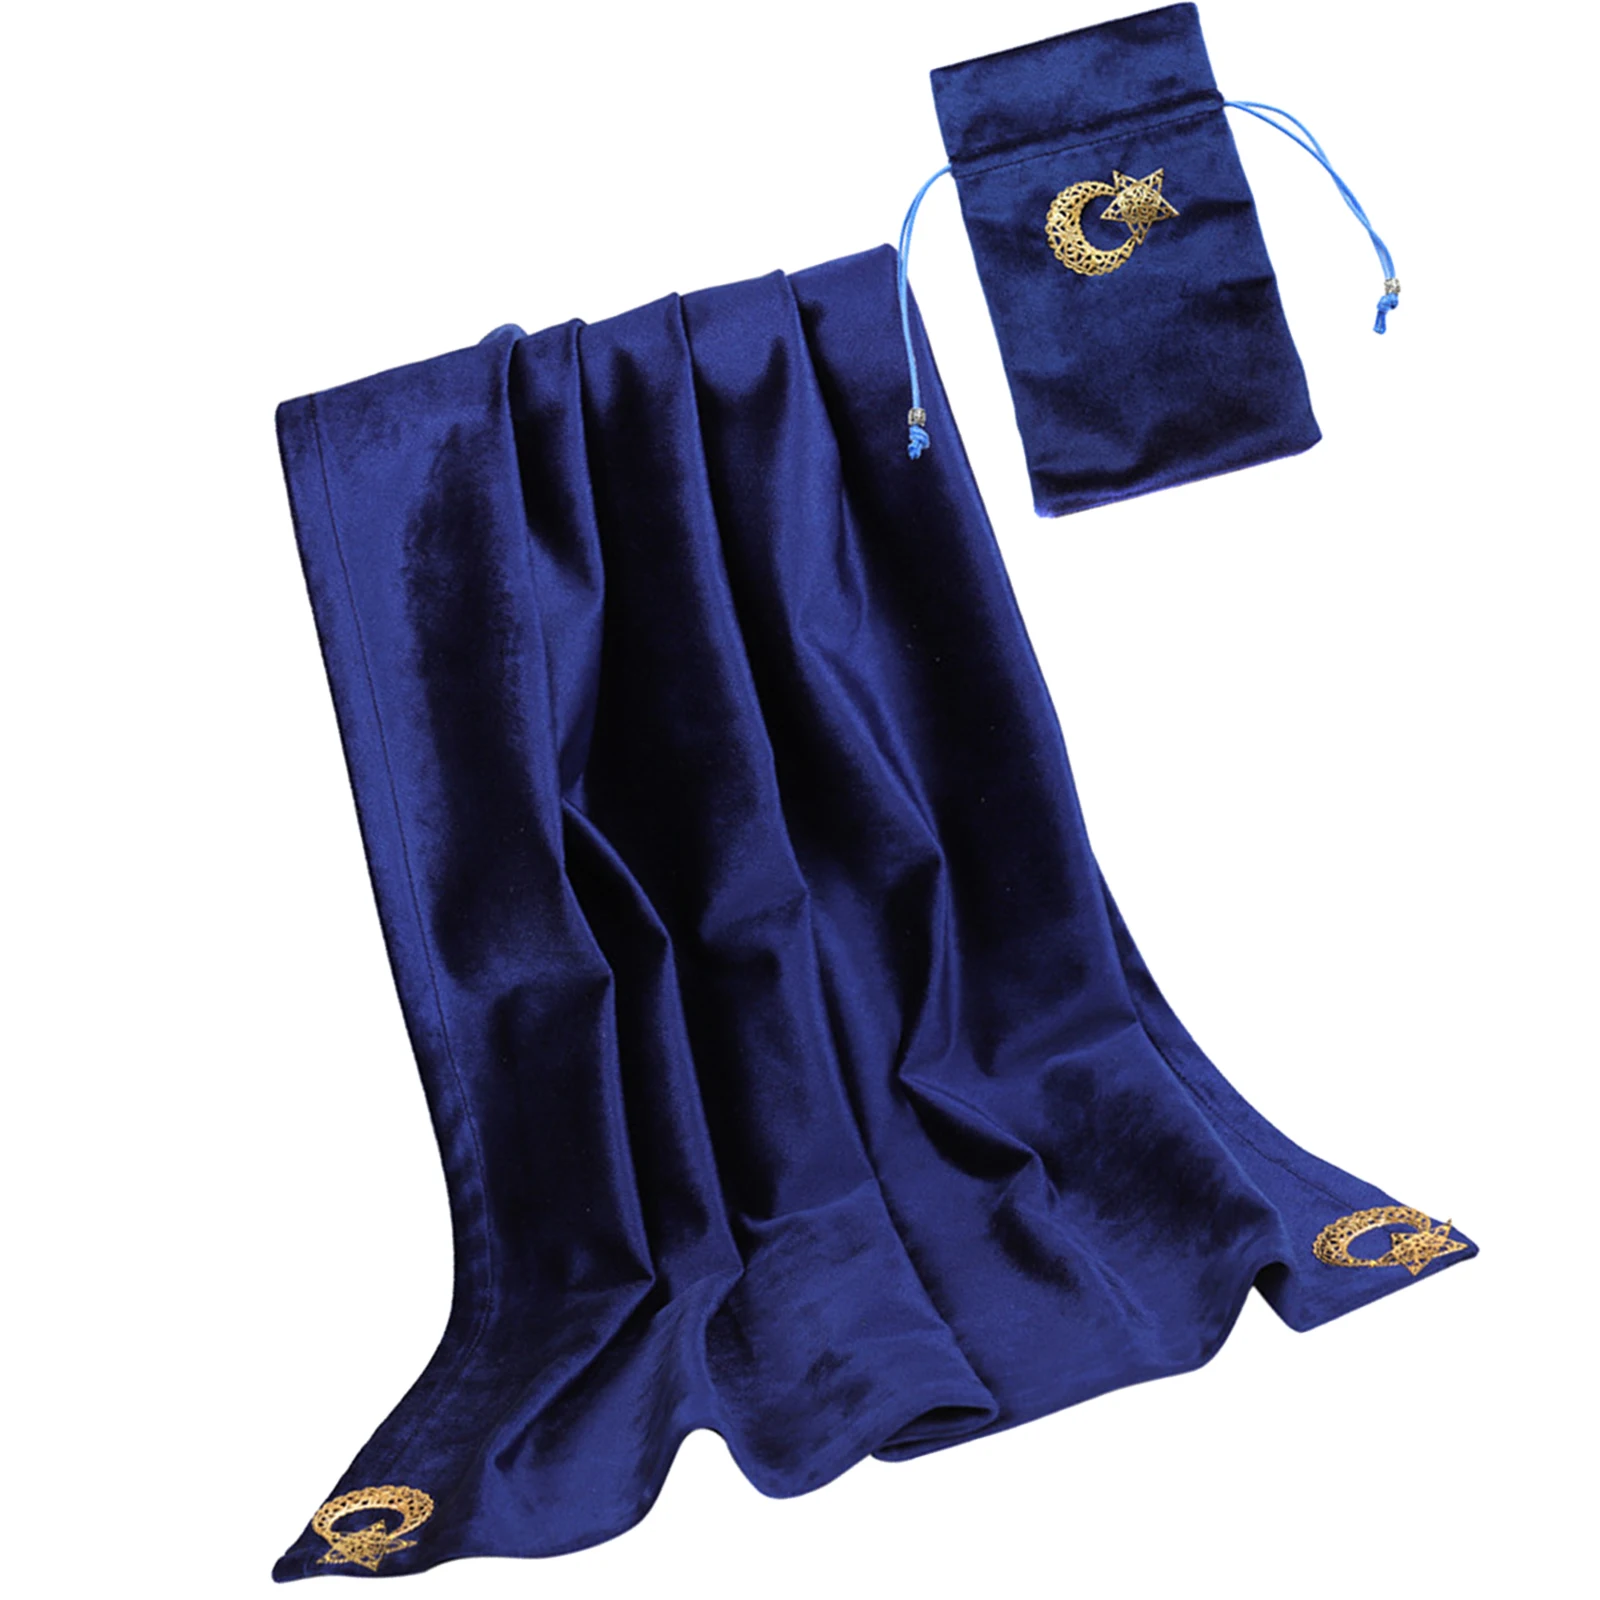 Altar Tarot Table Cloth Divination Velvet Embroidered Moon & Star Pattern Tablecloth with Tarot Pouch, 24.80x24.80inch